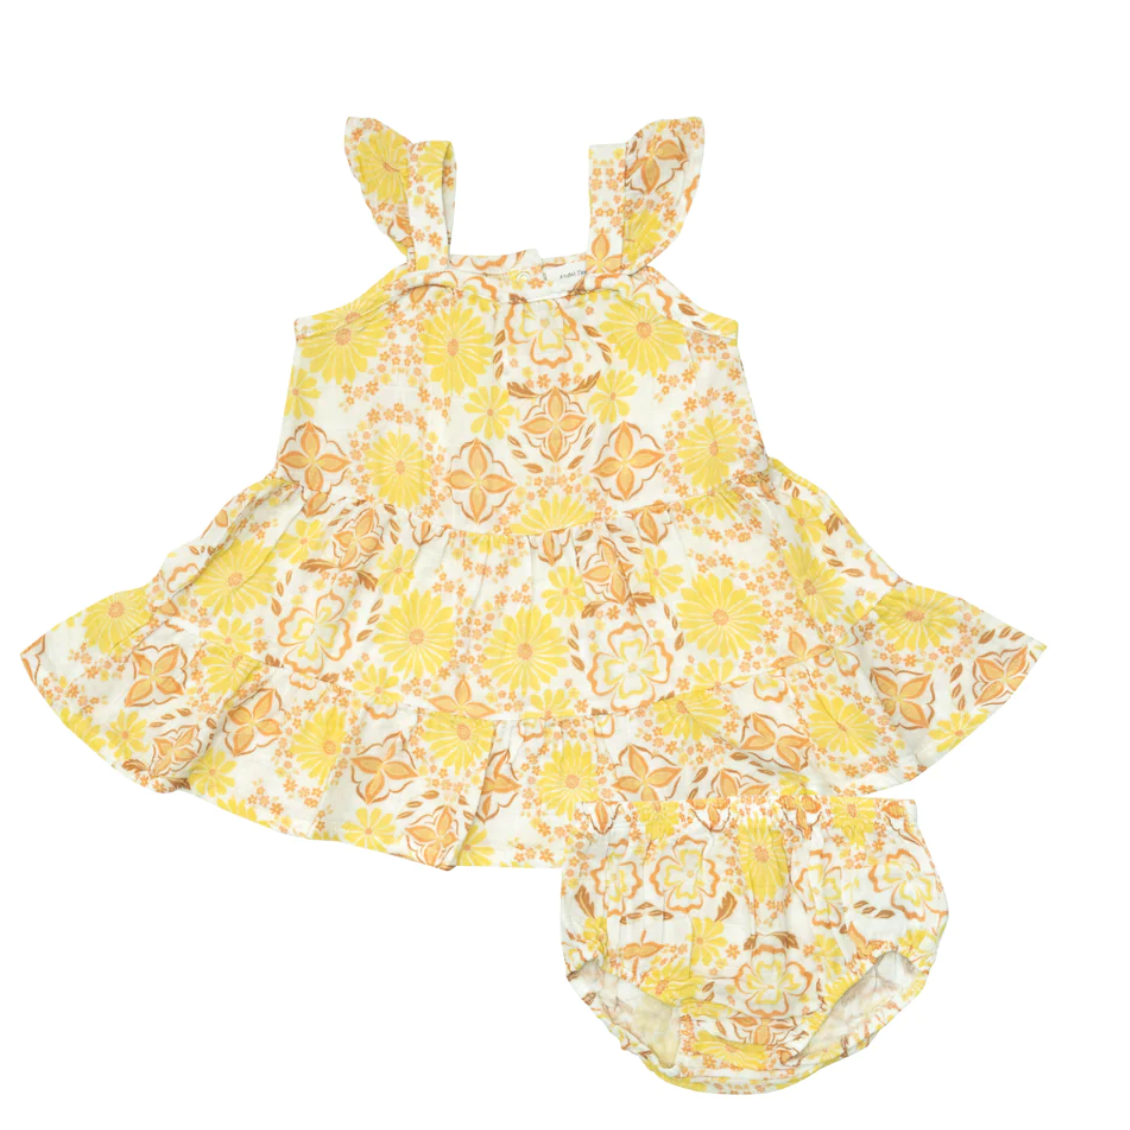 GOLDEN SURF FLORAL TWIRLY SUNDRESS DIAPER COVER